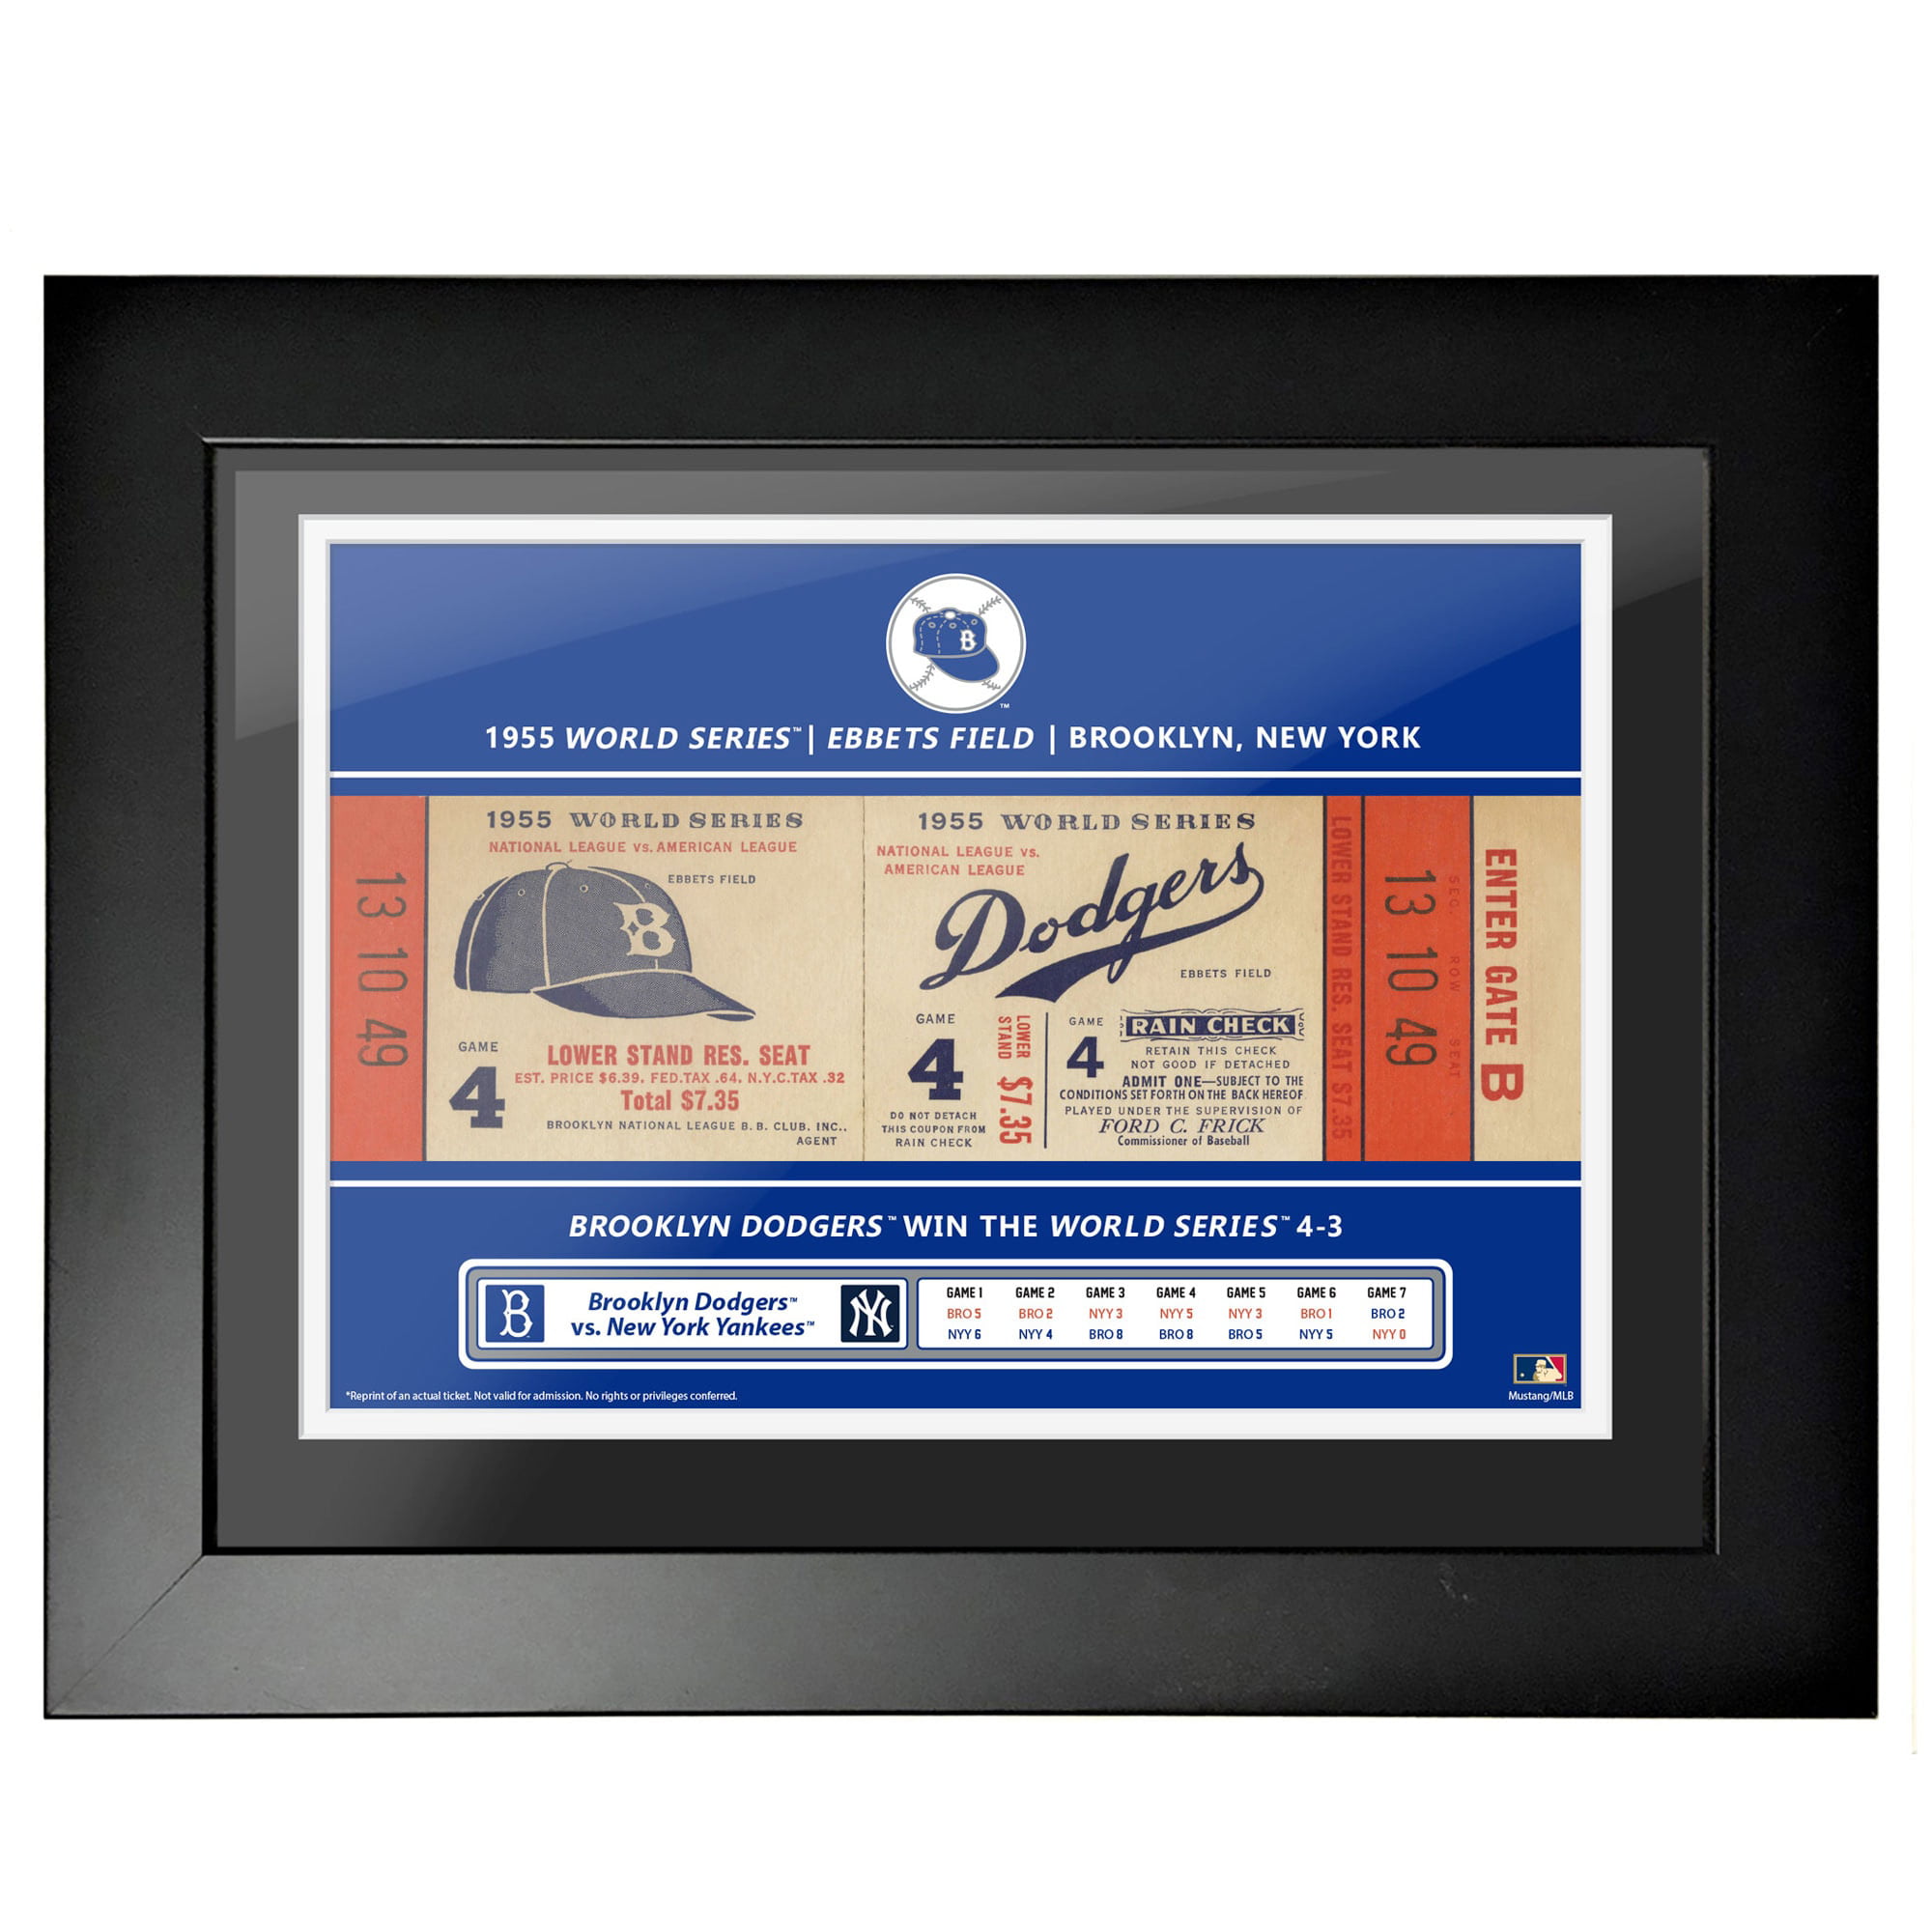 Size: 20 x 26 Framed Mustang Product Los Angeles & Brooklyn Dodgers World Series Tickets to History Photo 